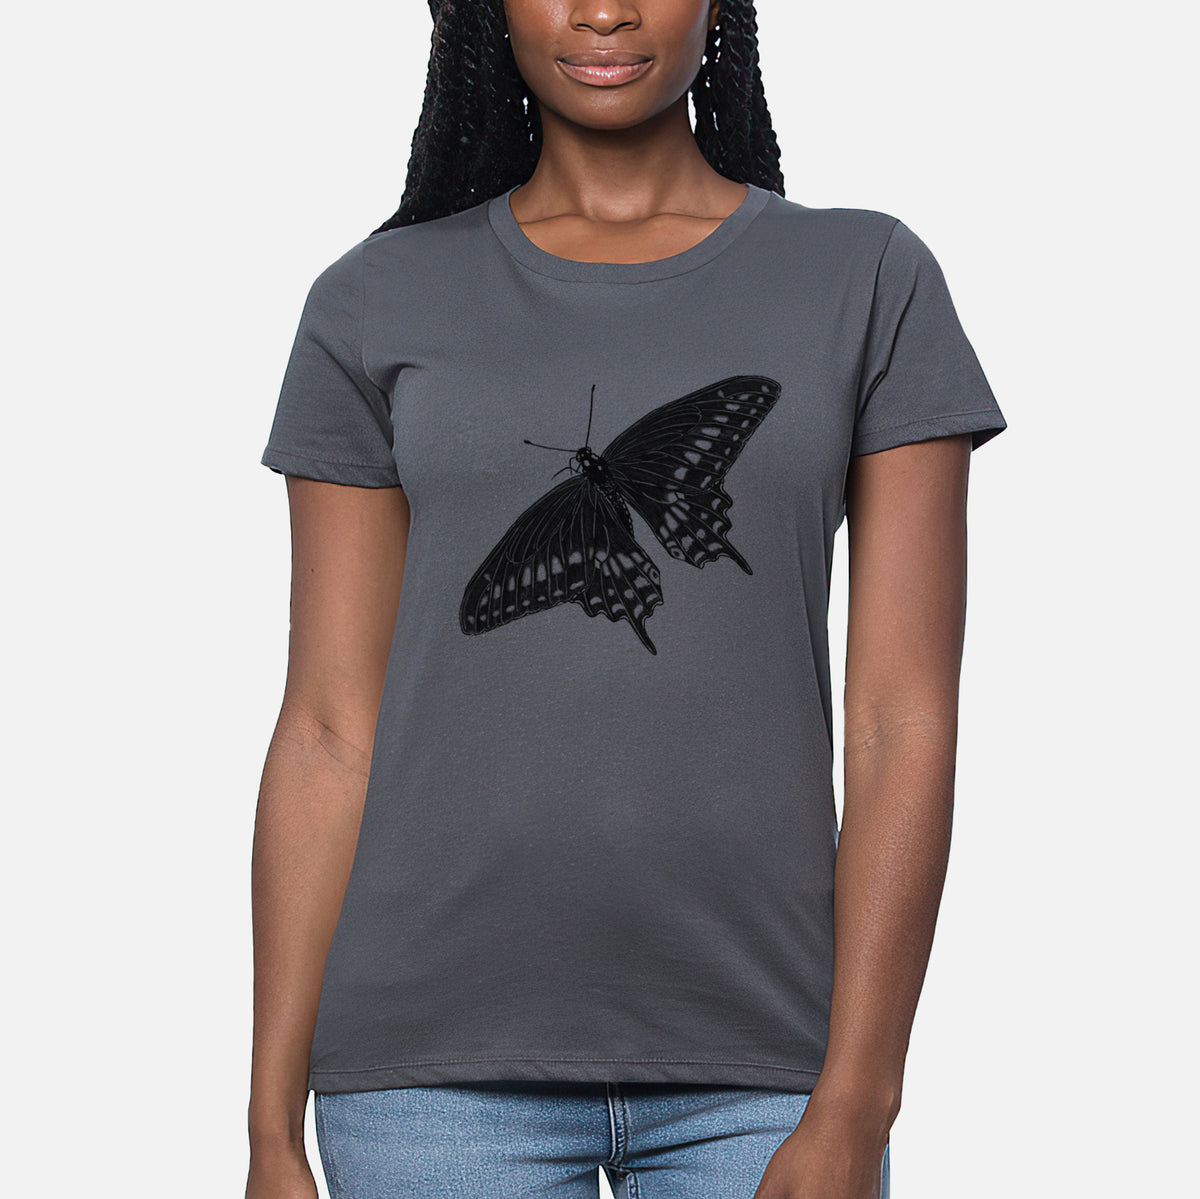 Black Swallowtail Butterfly - Papilio polyxenes - Women&#39;s Crewneck - Made in USA - 100% Organic Cotton